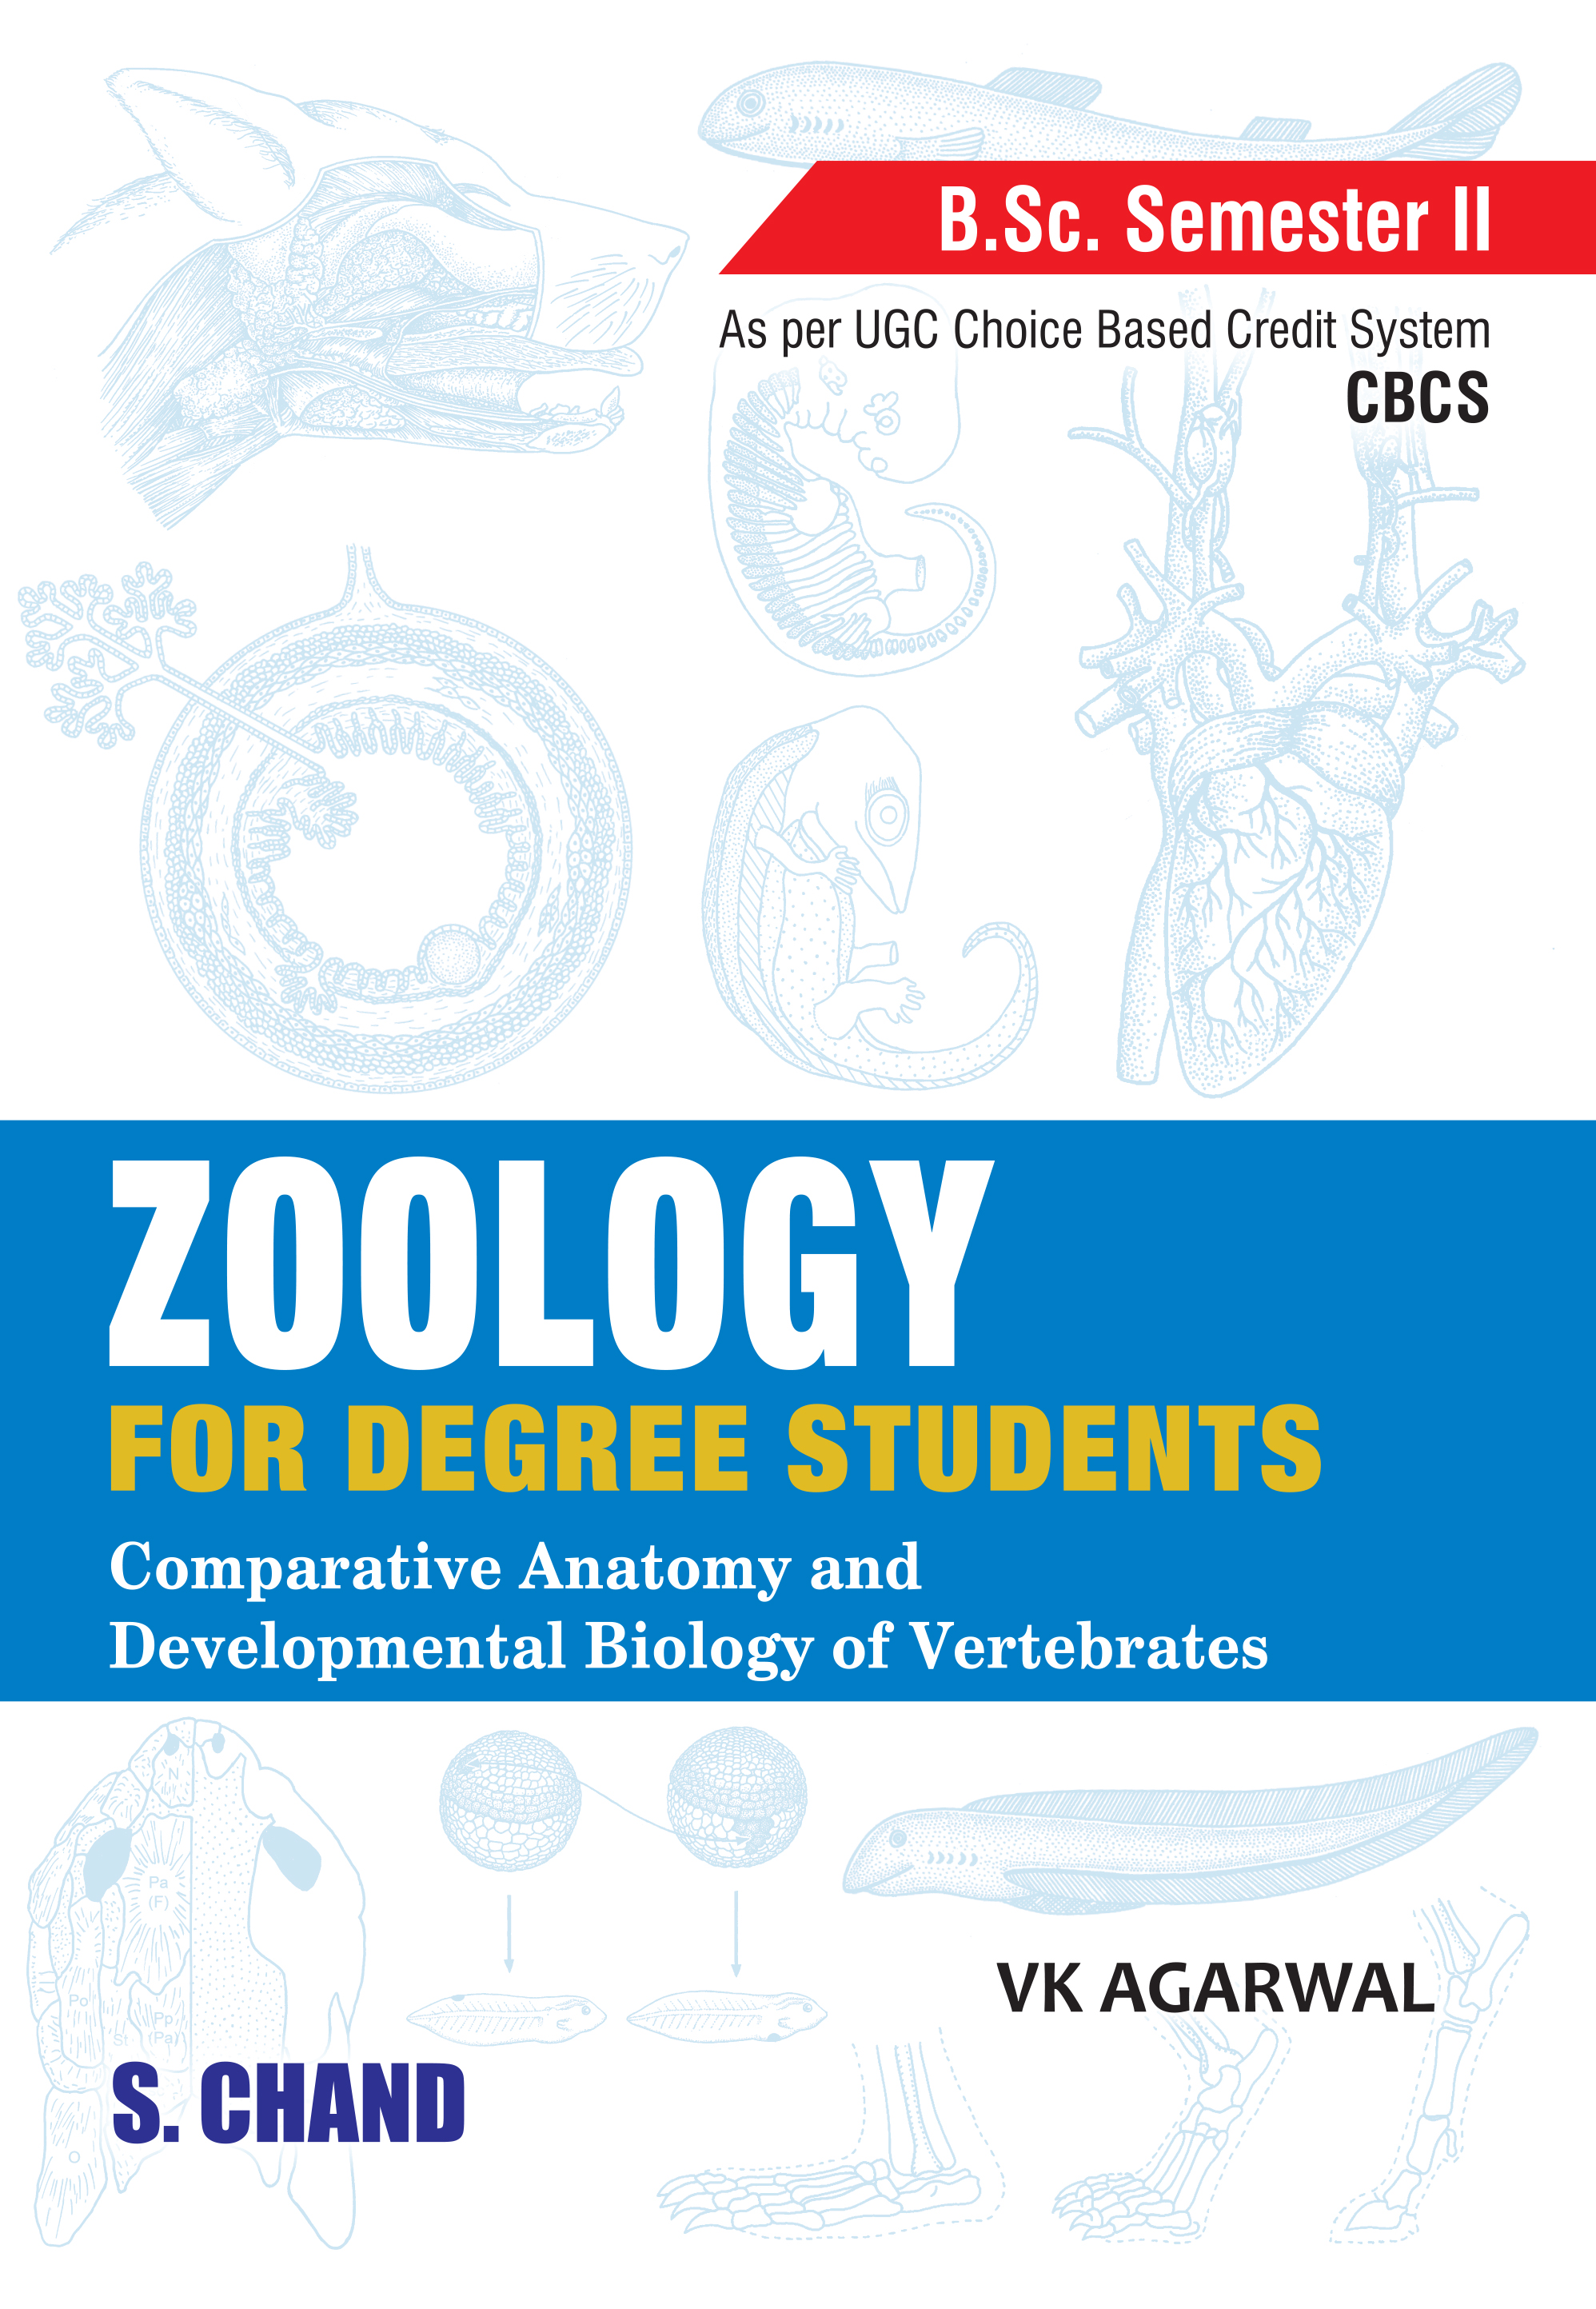 Zoology for Degree Students (B.Sc. Programme)-Semester II (As per UGC CBCS)